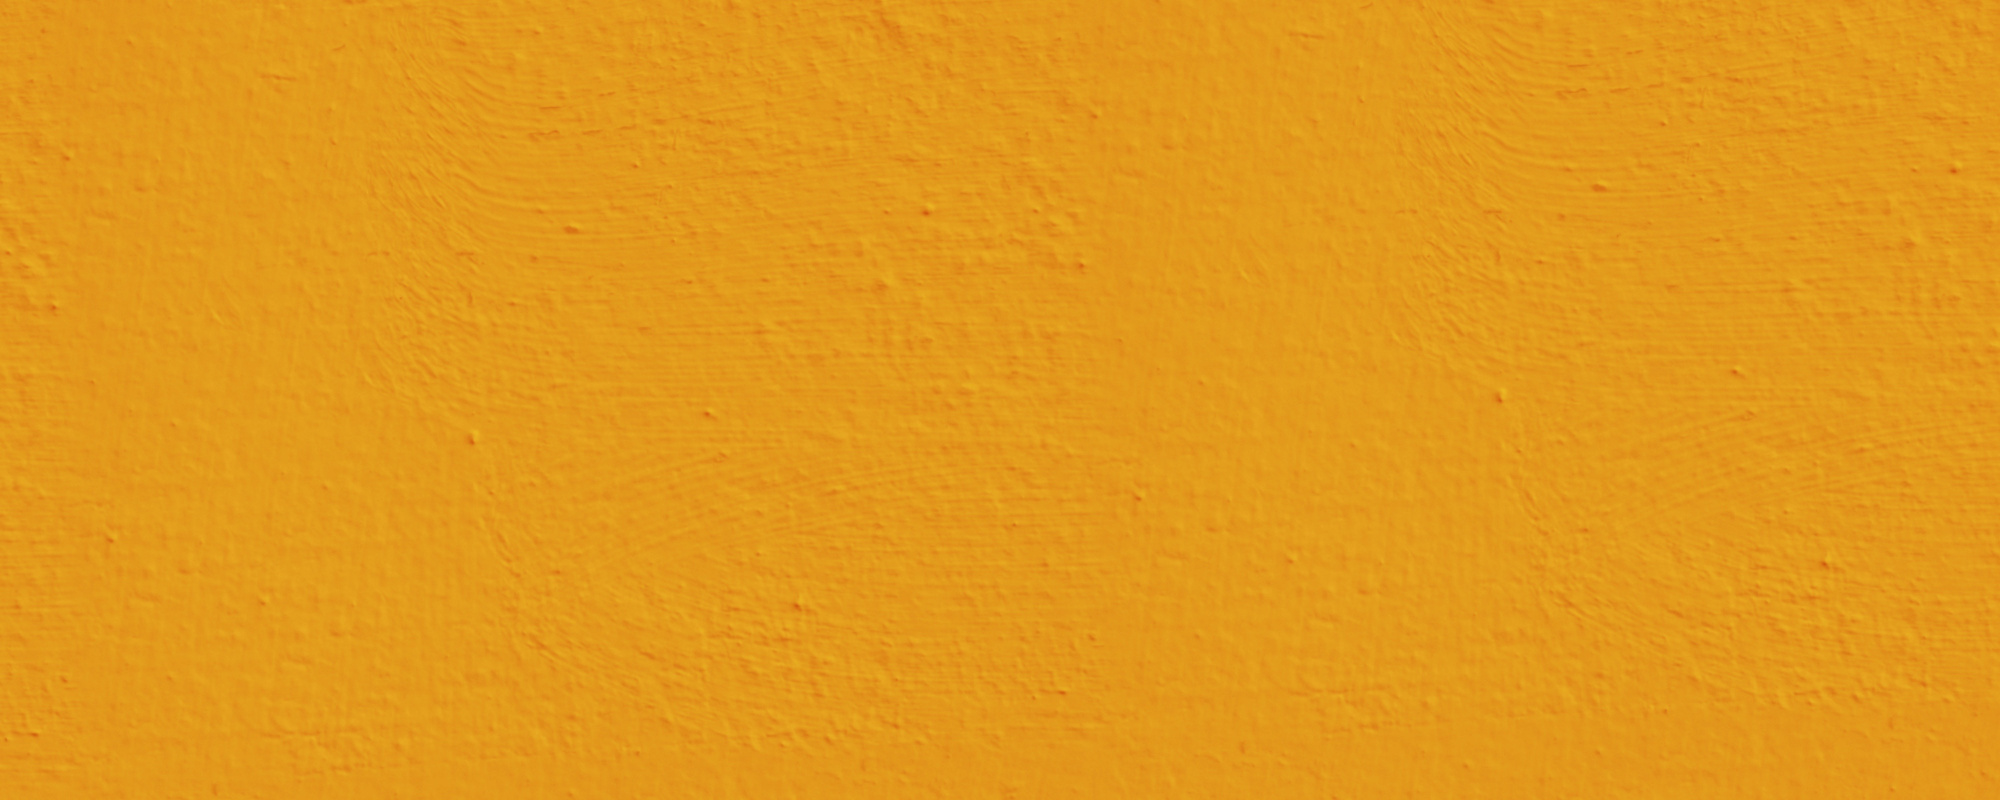 Yellow Emulsion wall paint texture rectangle background